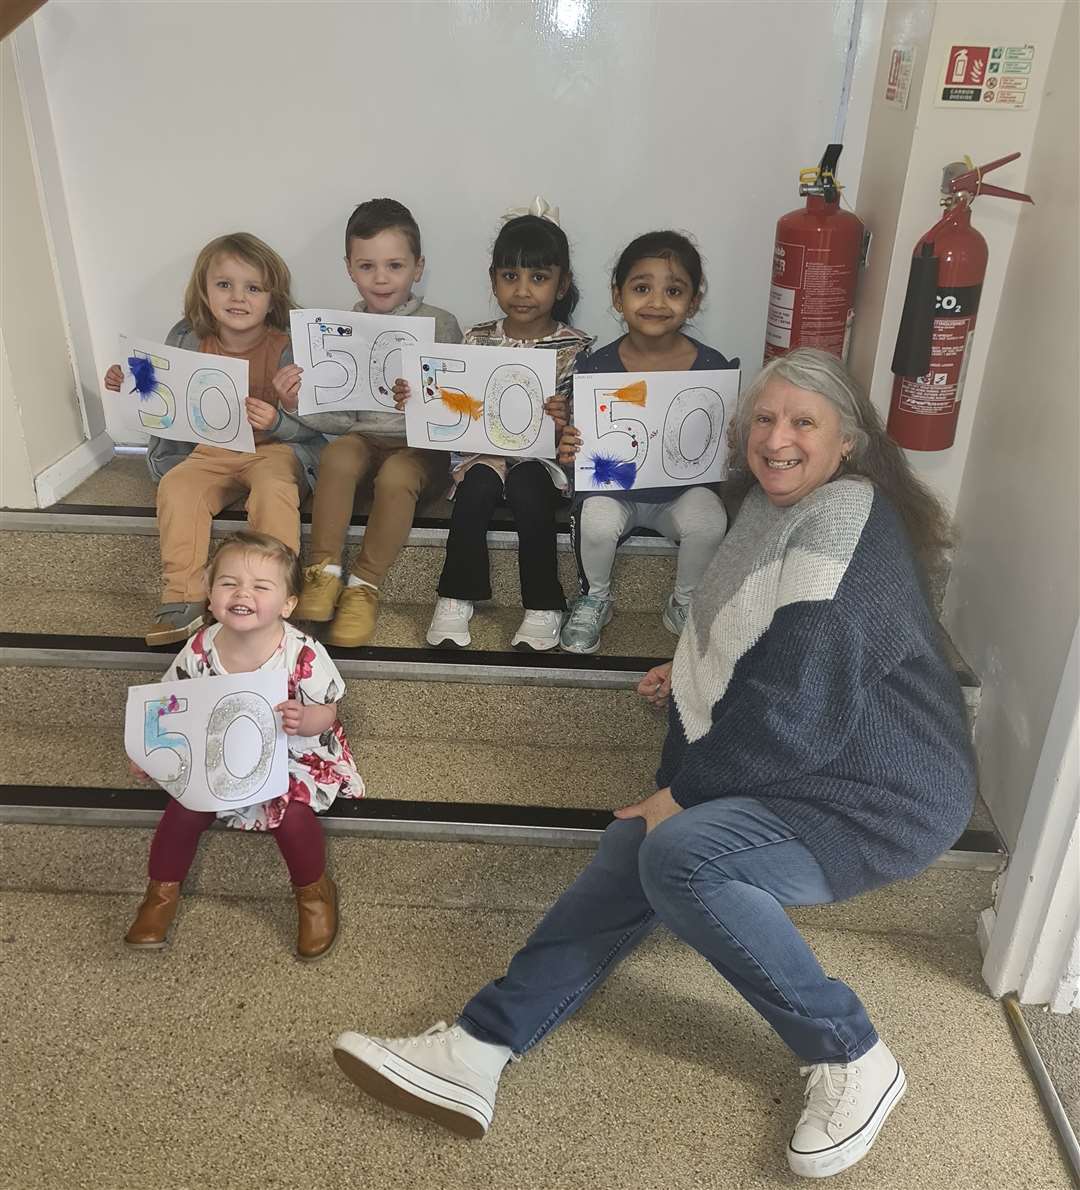 Some of the children with playgroup worker Tina. Photo: Kirsty Barden